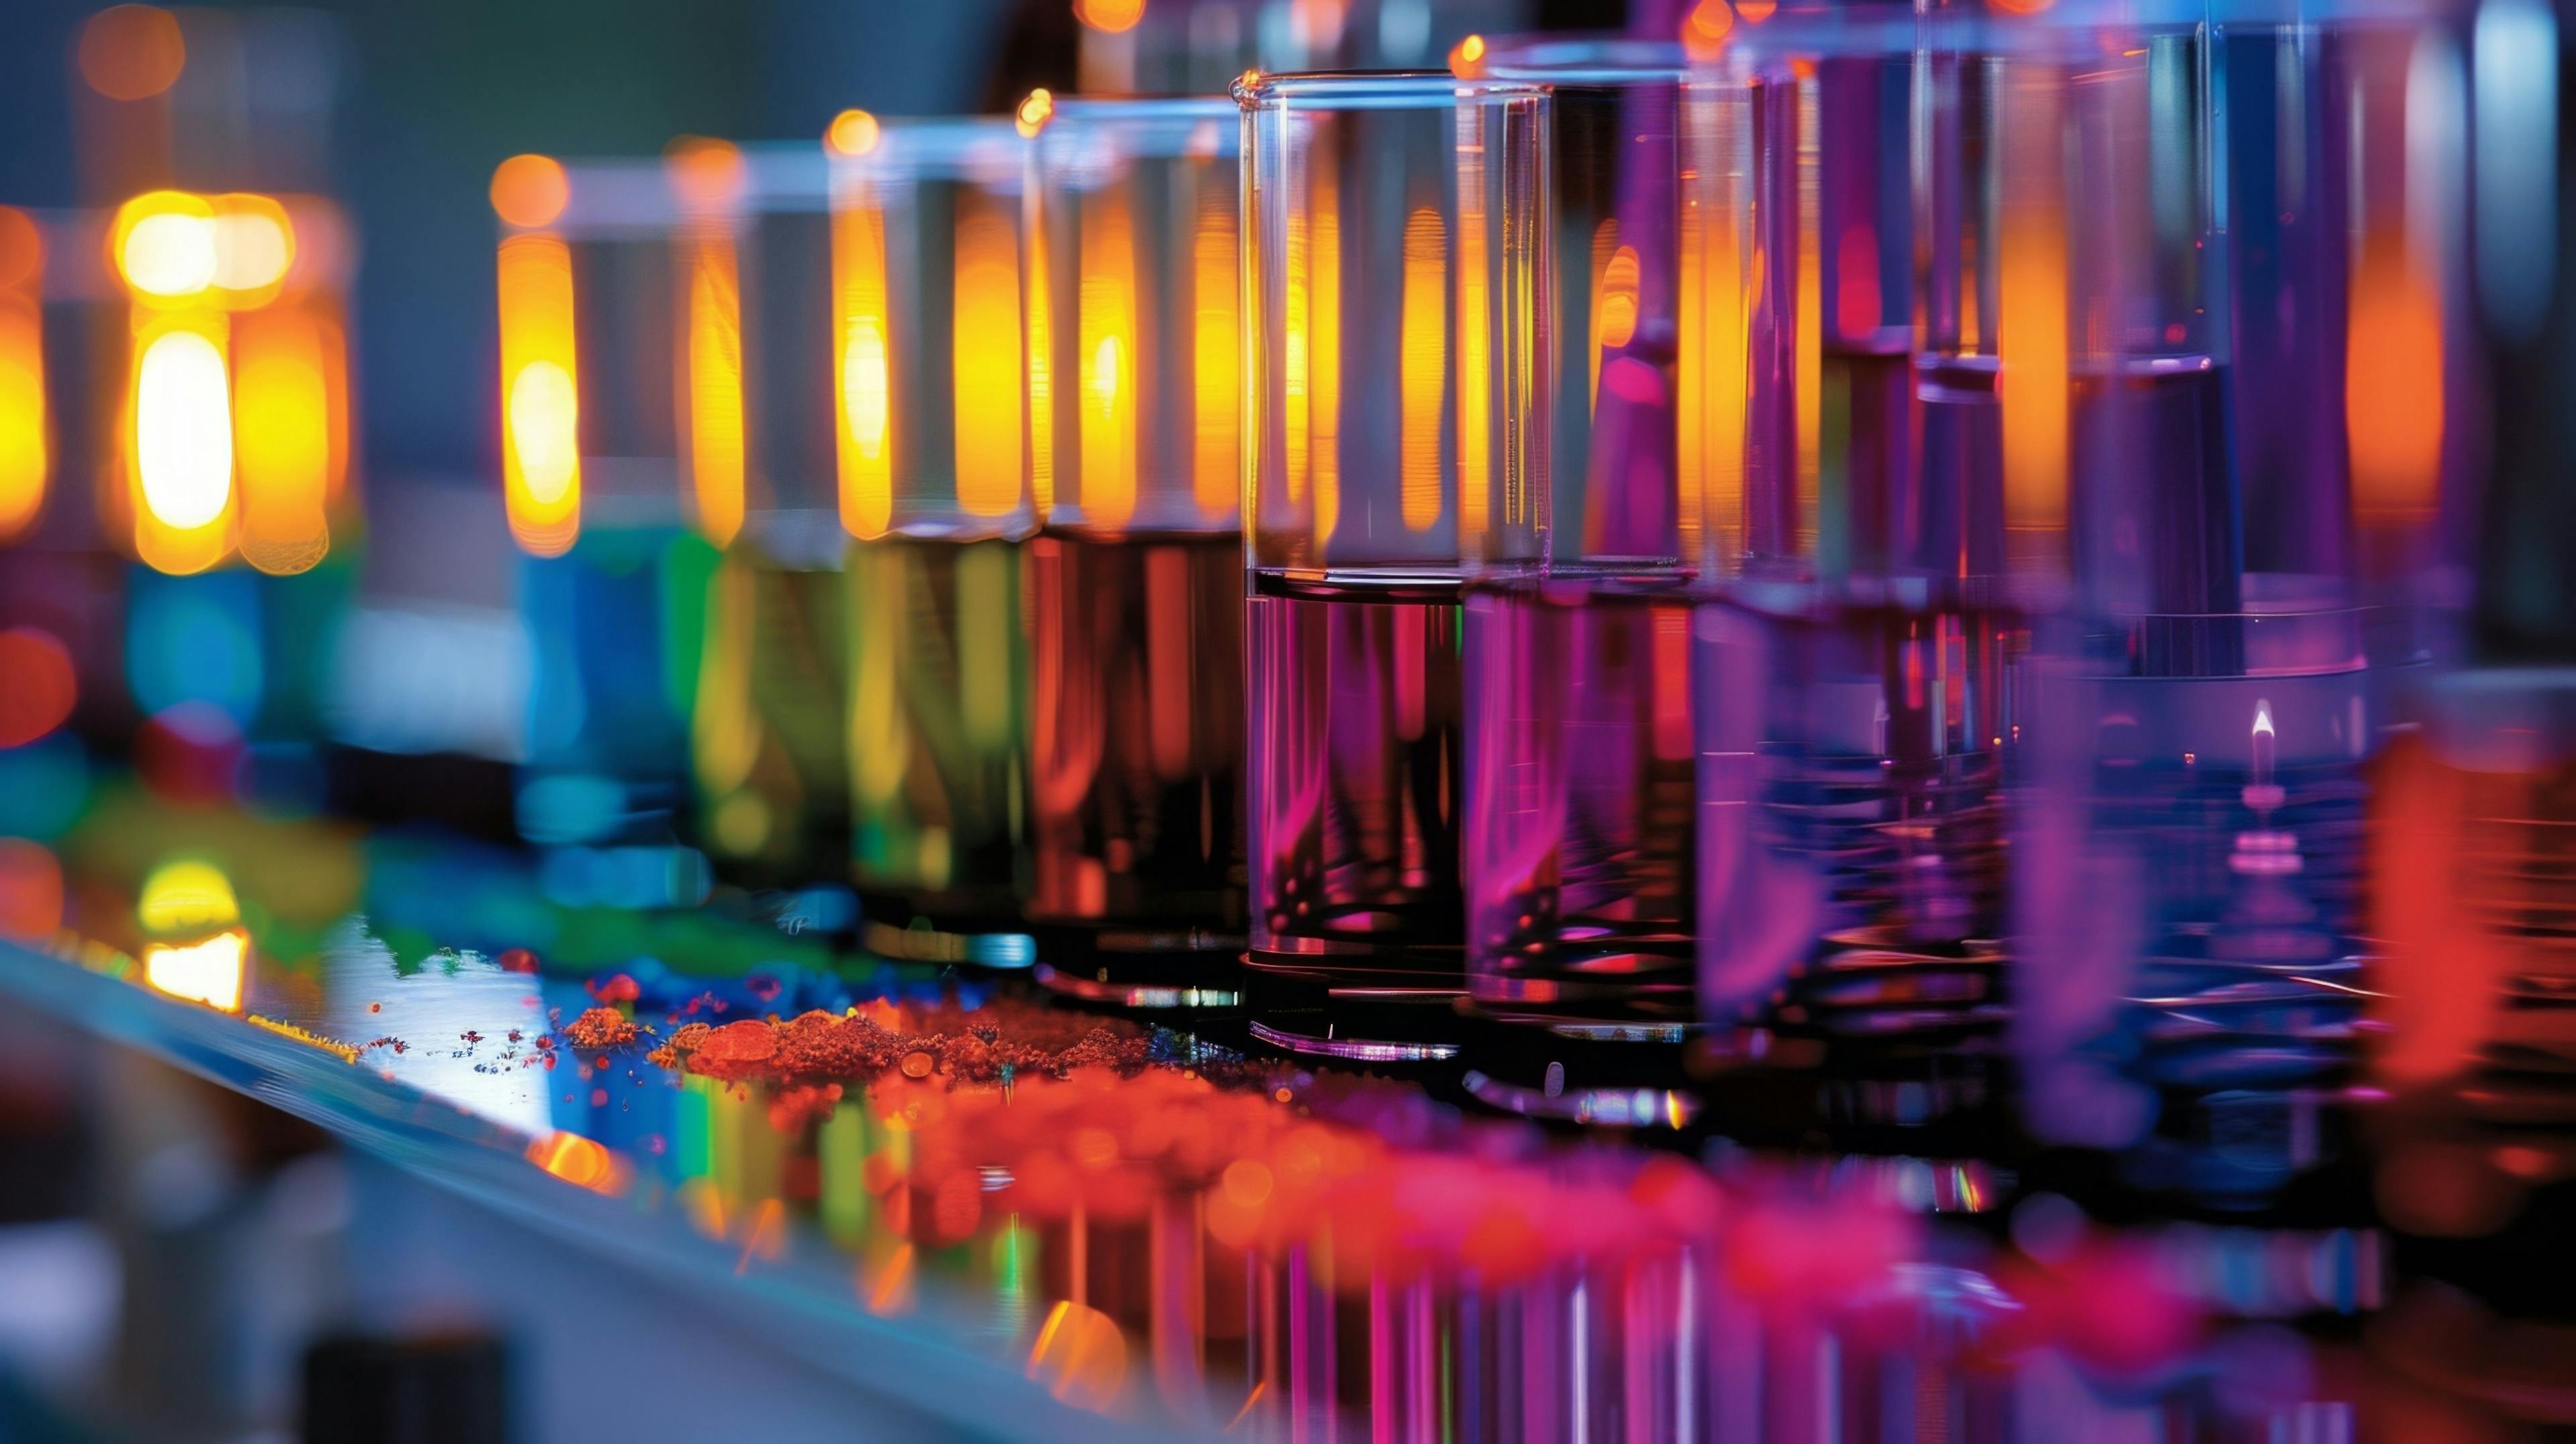 A chromatography column separates compounds based on their affinity for a stationary phase, creating bands of vivid color. | Image Credit: © Muhammad - stock.adobe.com